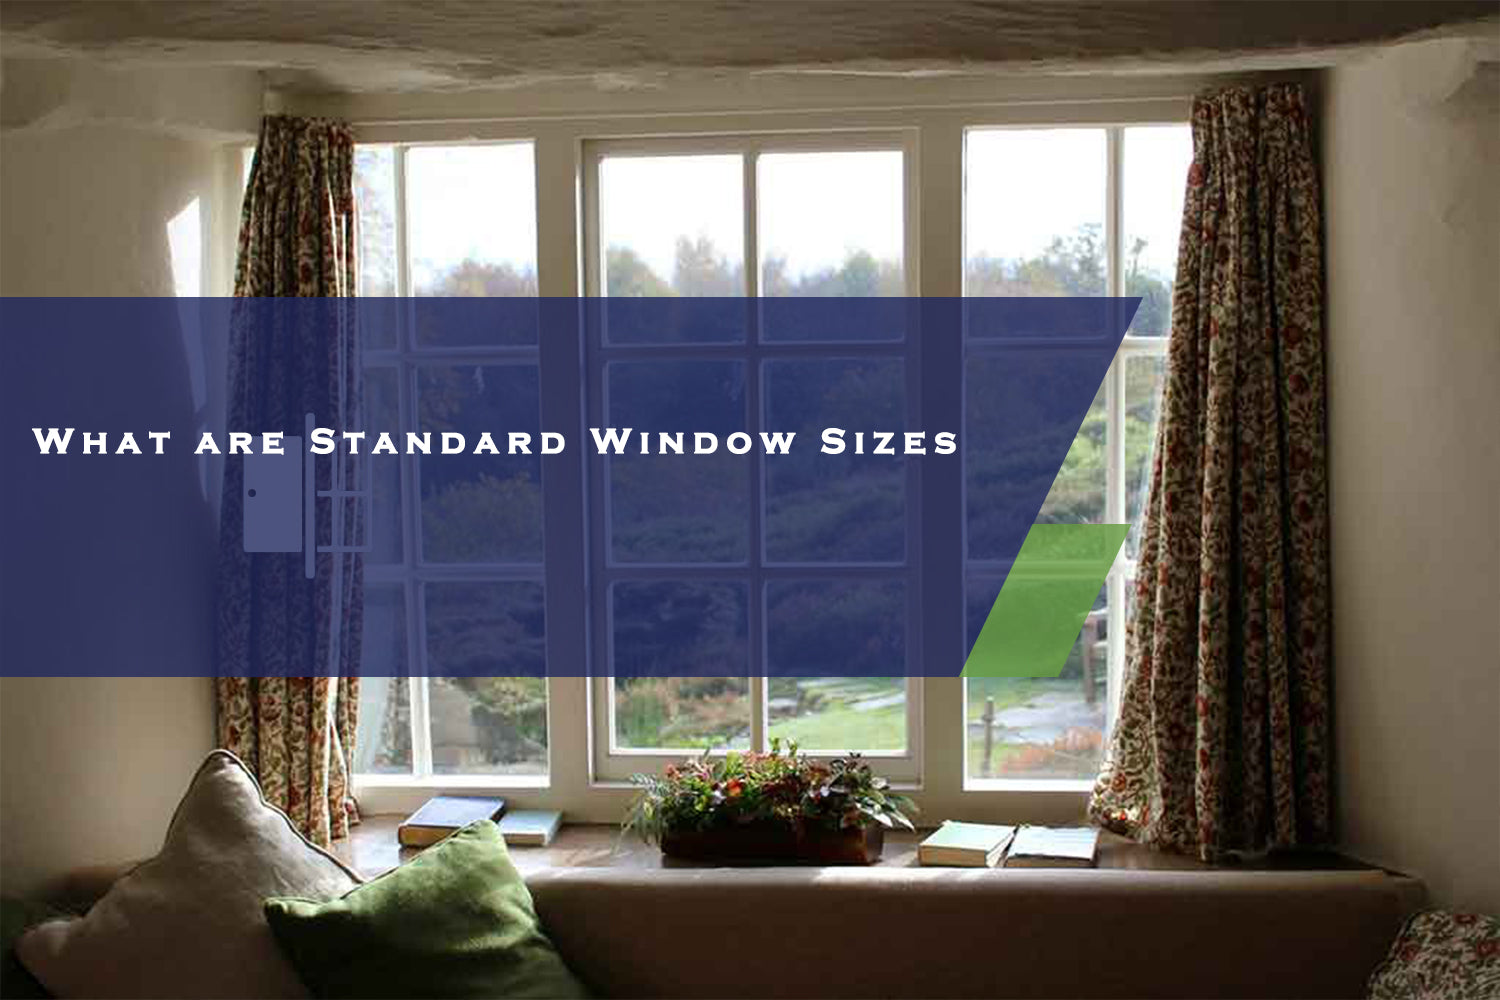 What are Standard Window Sizes?